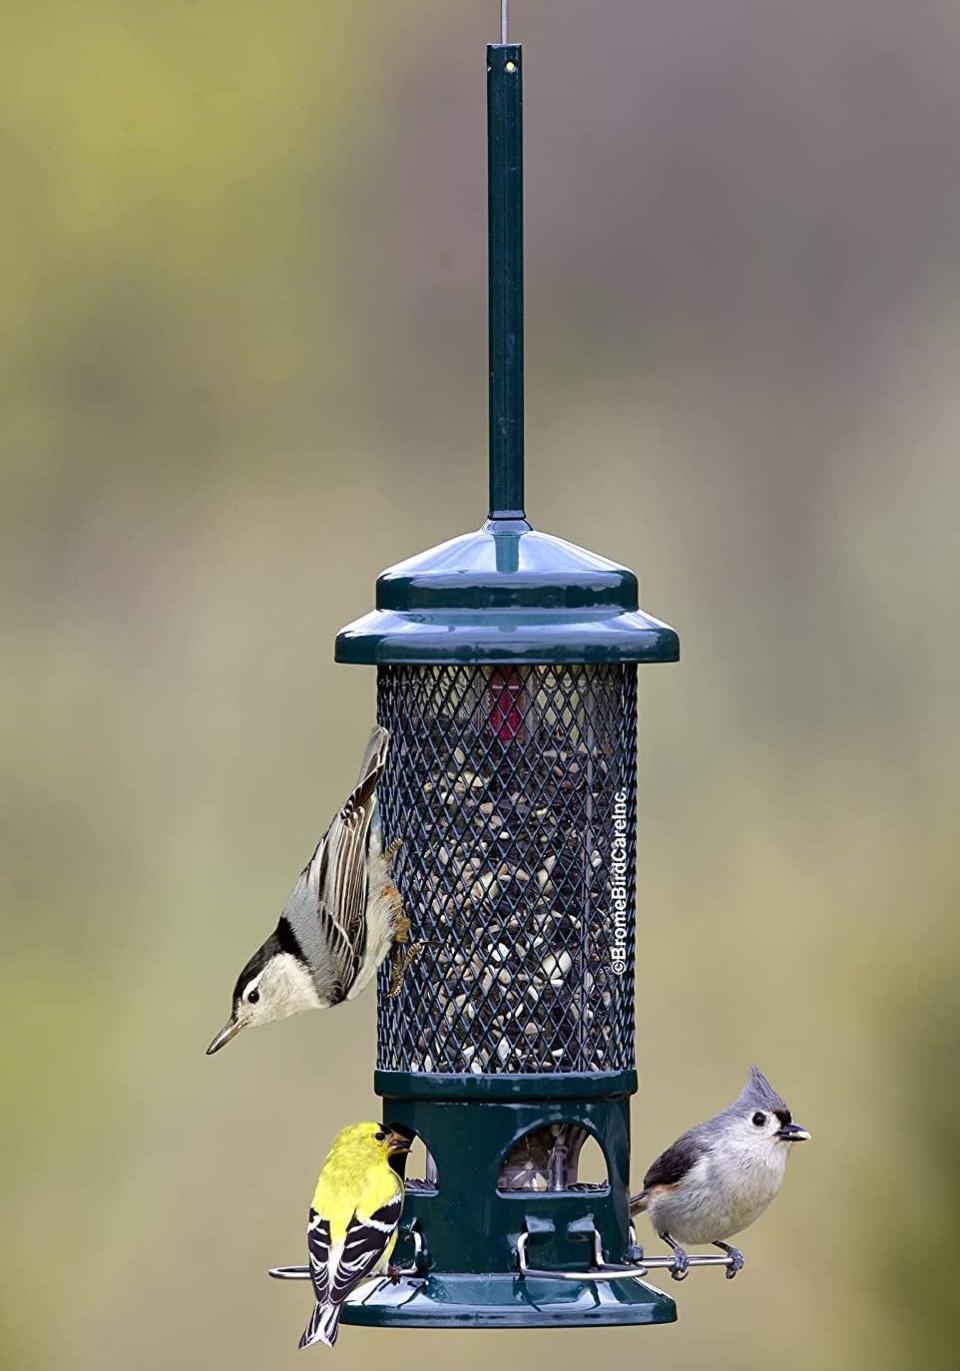 A squirrel-proof bird feeder with three different bird species perched on it